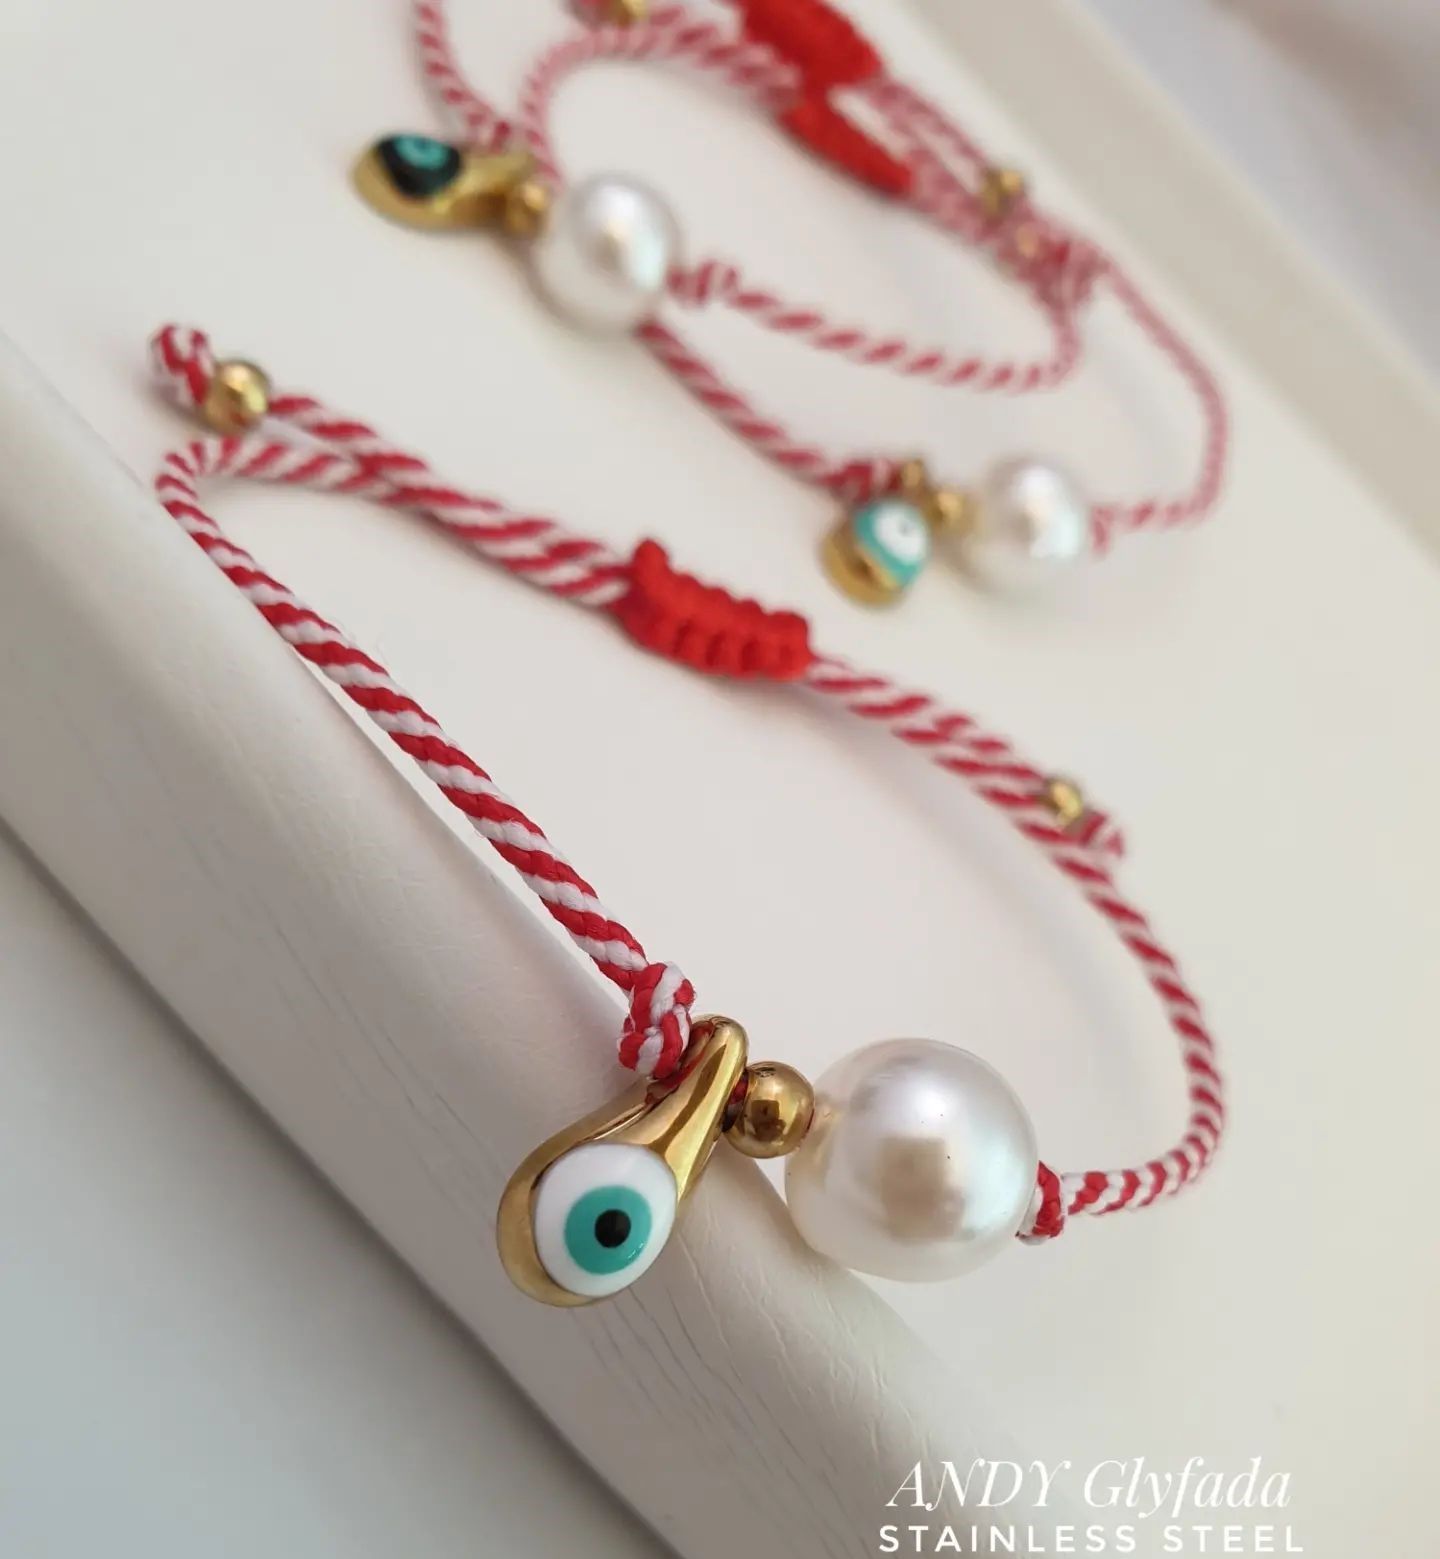 Handmade March Bracelet Drop Stainless Steel with Evil Eye Enamel and Pearl in Macrame Cotton Cord